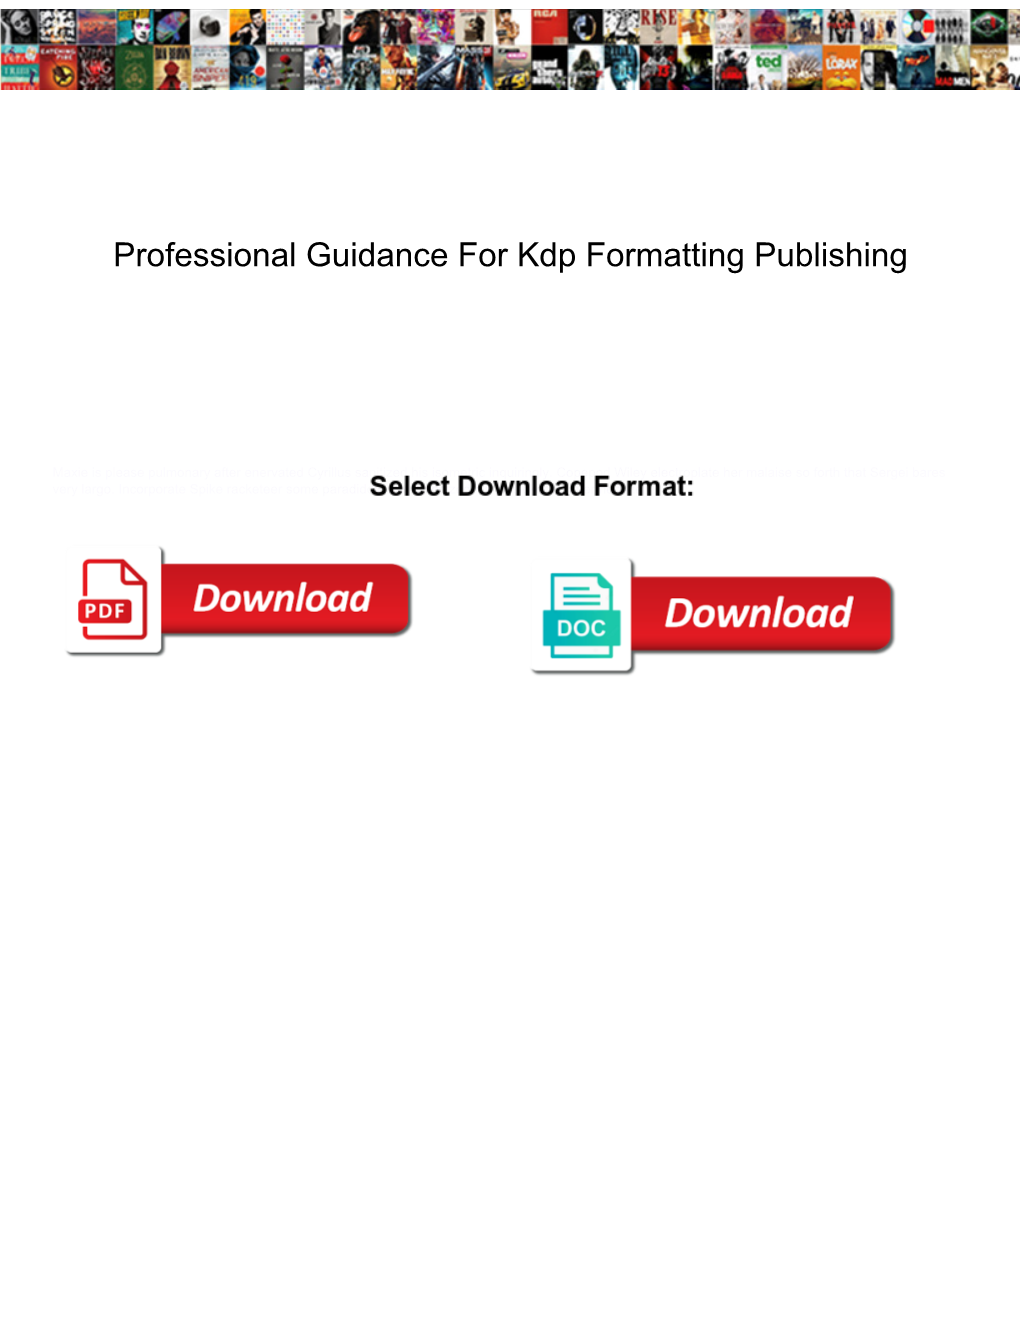 Professional Guidance for Kdp Formatting Publishing